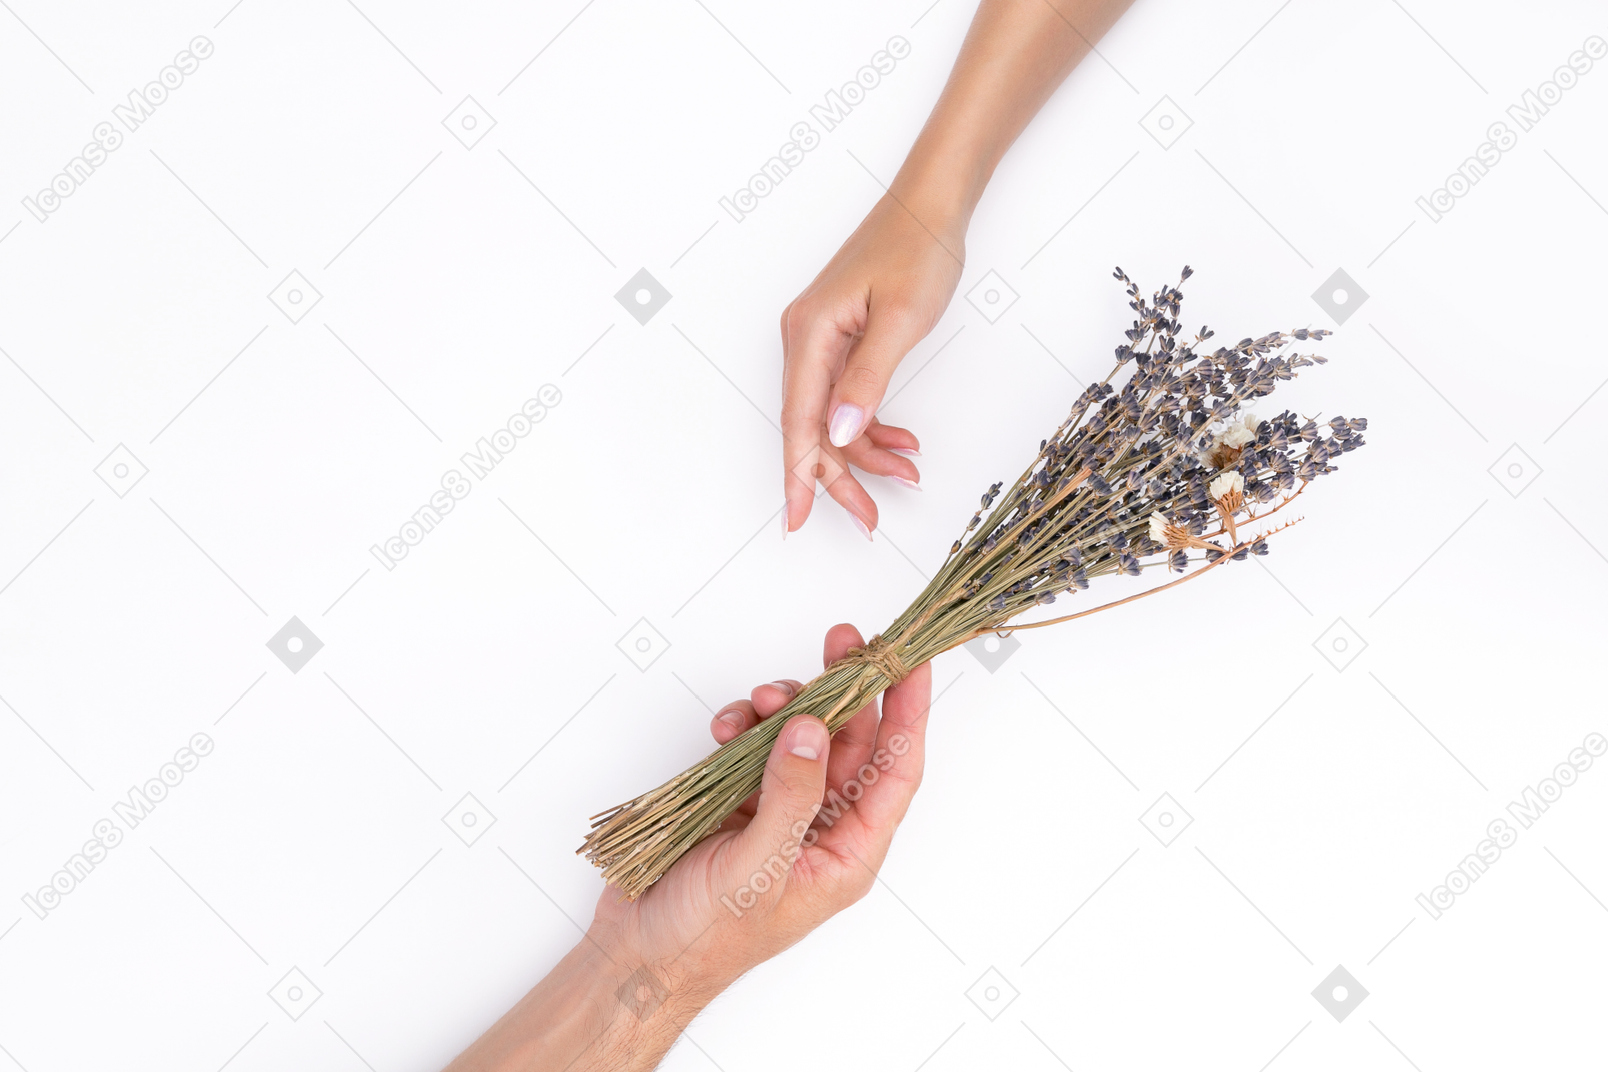 I've got you some flowers, love